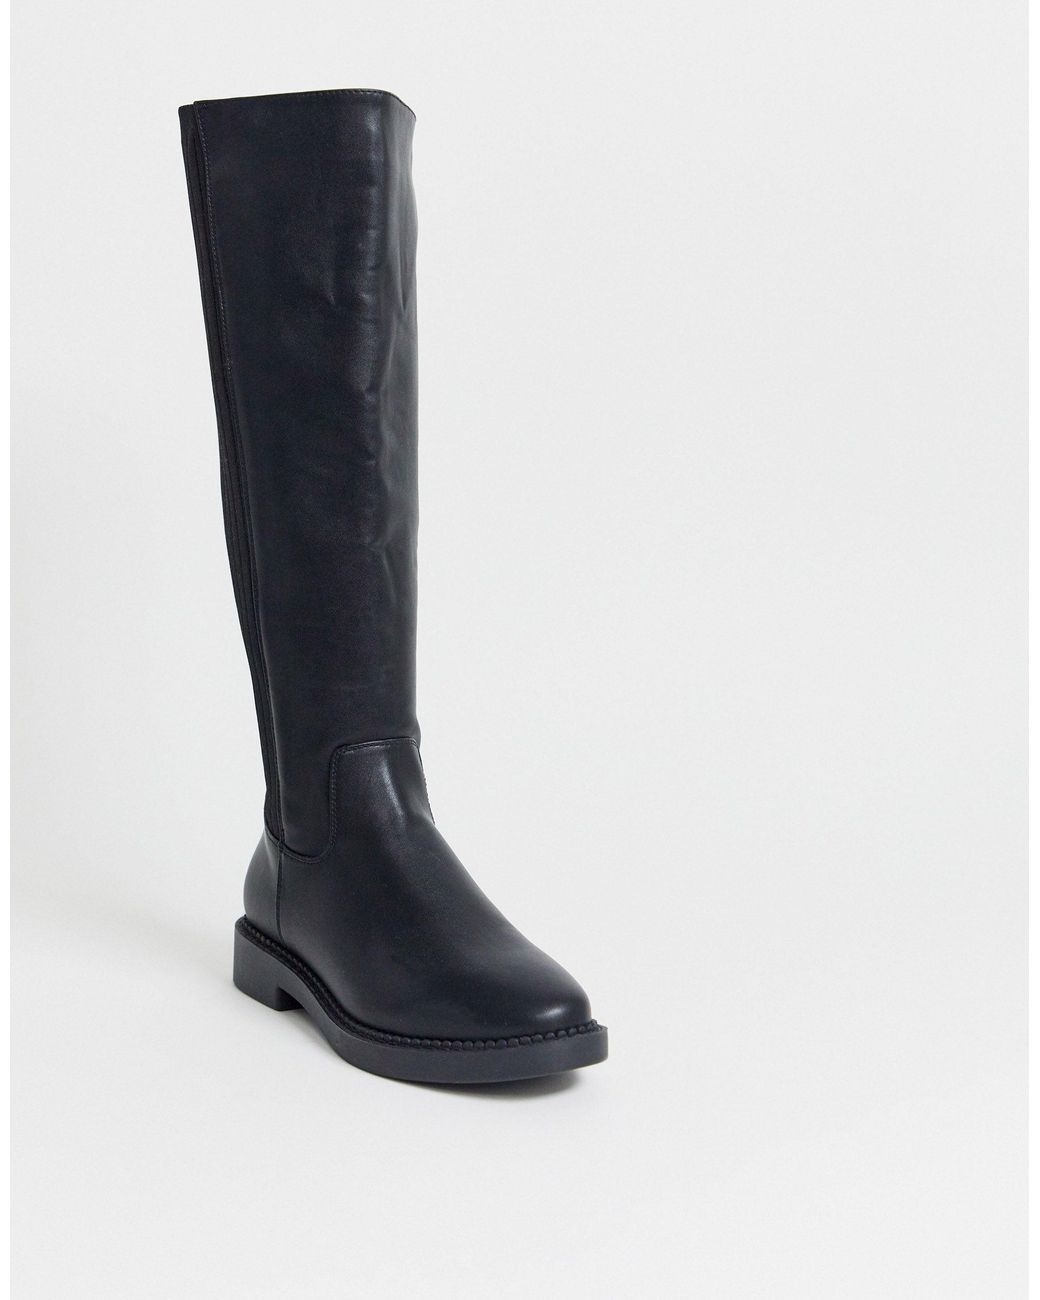 Capital Chunky Knee High Boots in Black 